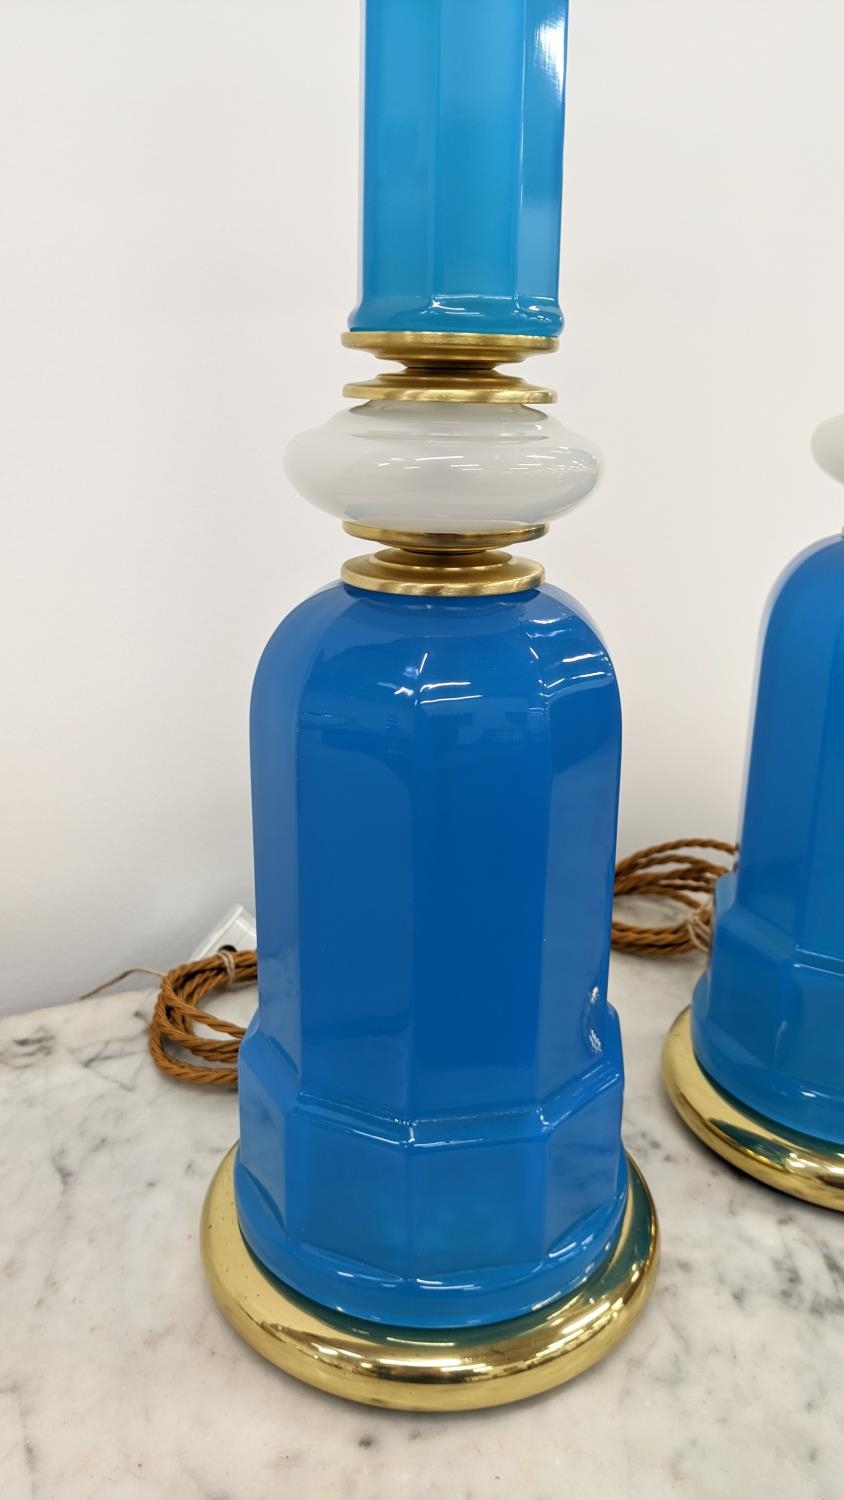 CENEDESE MURANO GLASS TABLE LAMPS, a pair, vintage blue and white opaline glass, gilt metal bases, - Image 2 of 5